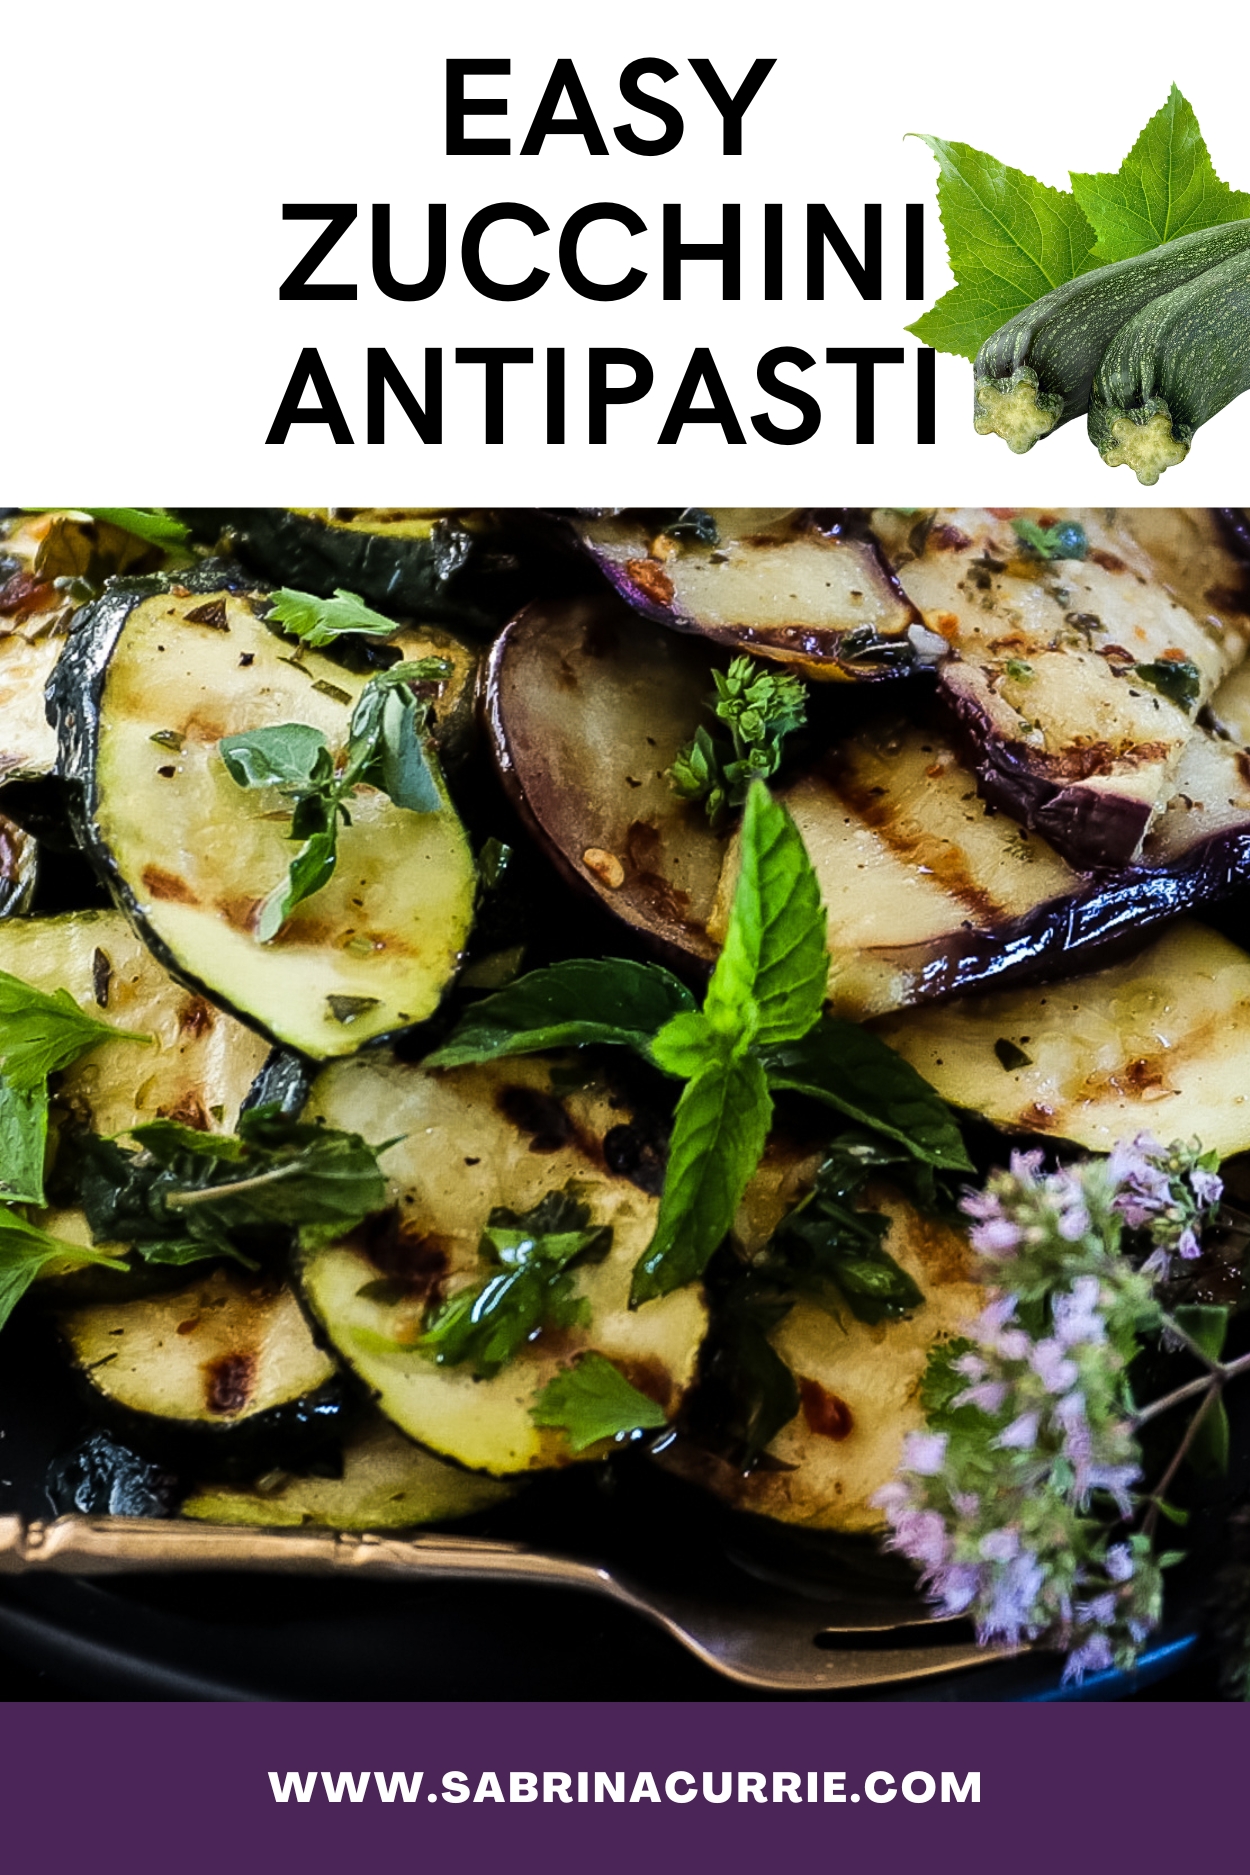 Recipe title abve a close up of grilled zucchini and eggplant with grill marks on each and flowering oregano and mint leaves garnishing it.